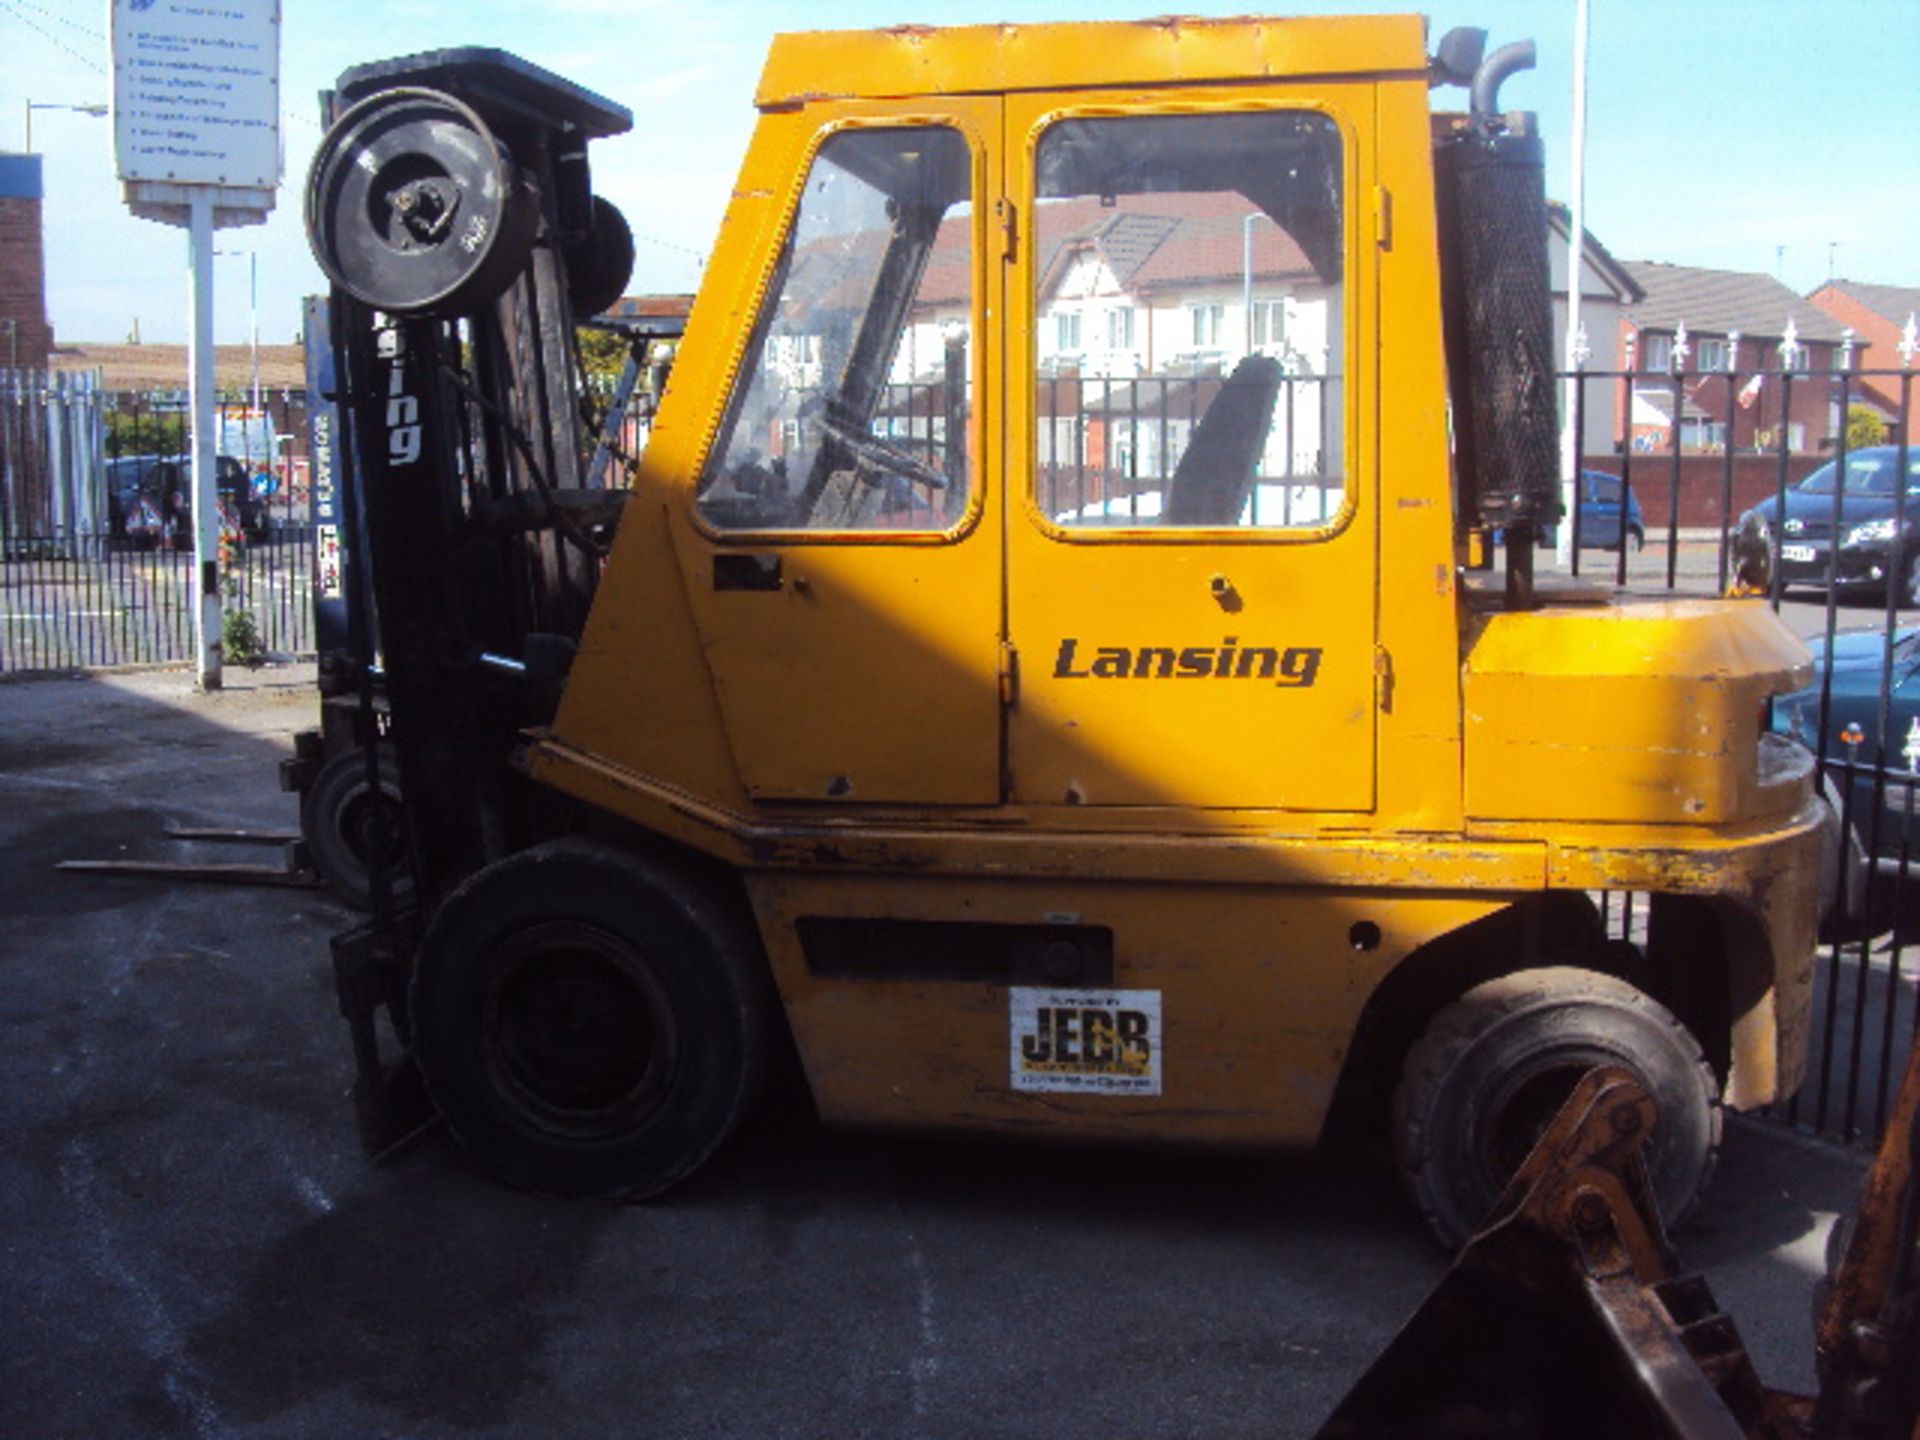 LANSING 7.40 4t diesel driven forklift truck with duplex free-lift mast (sold as not working)